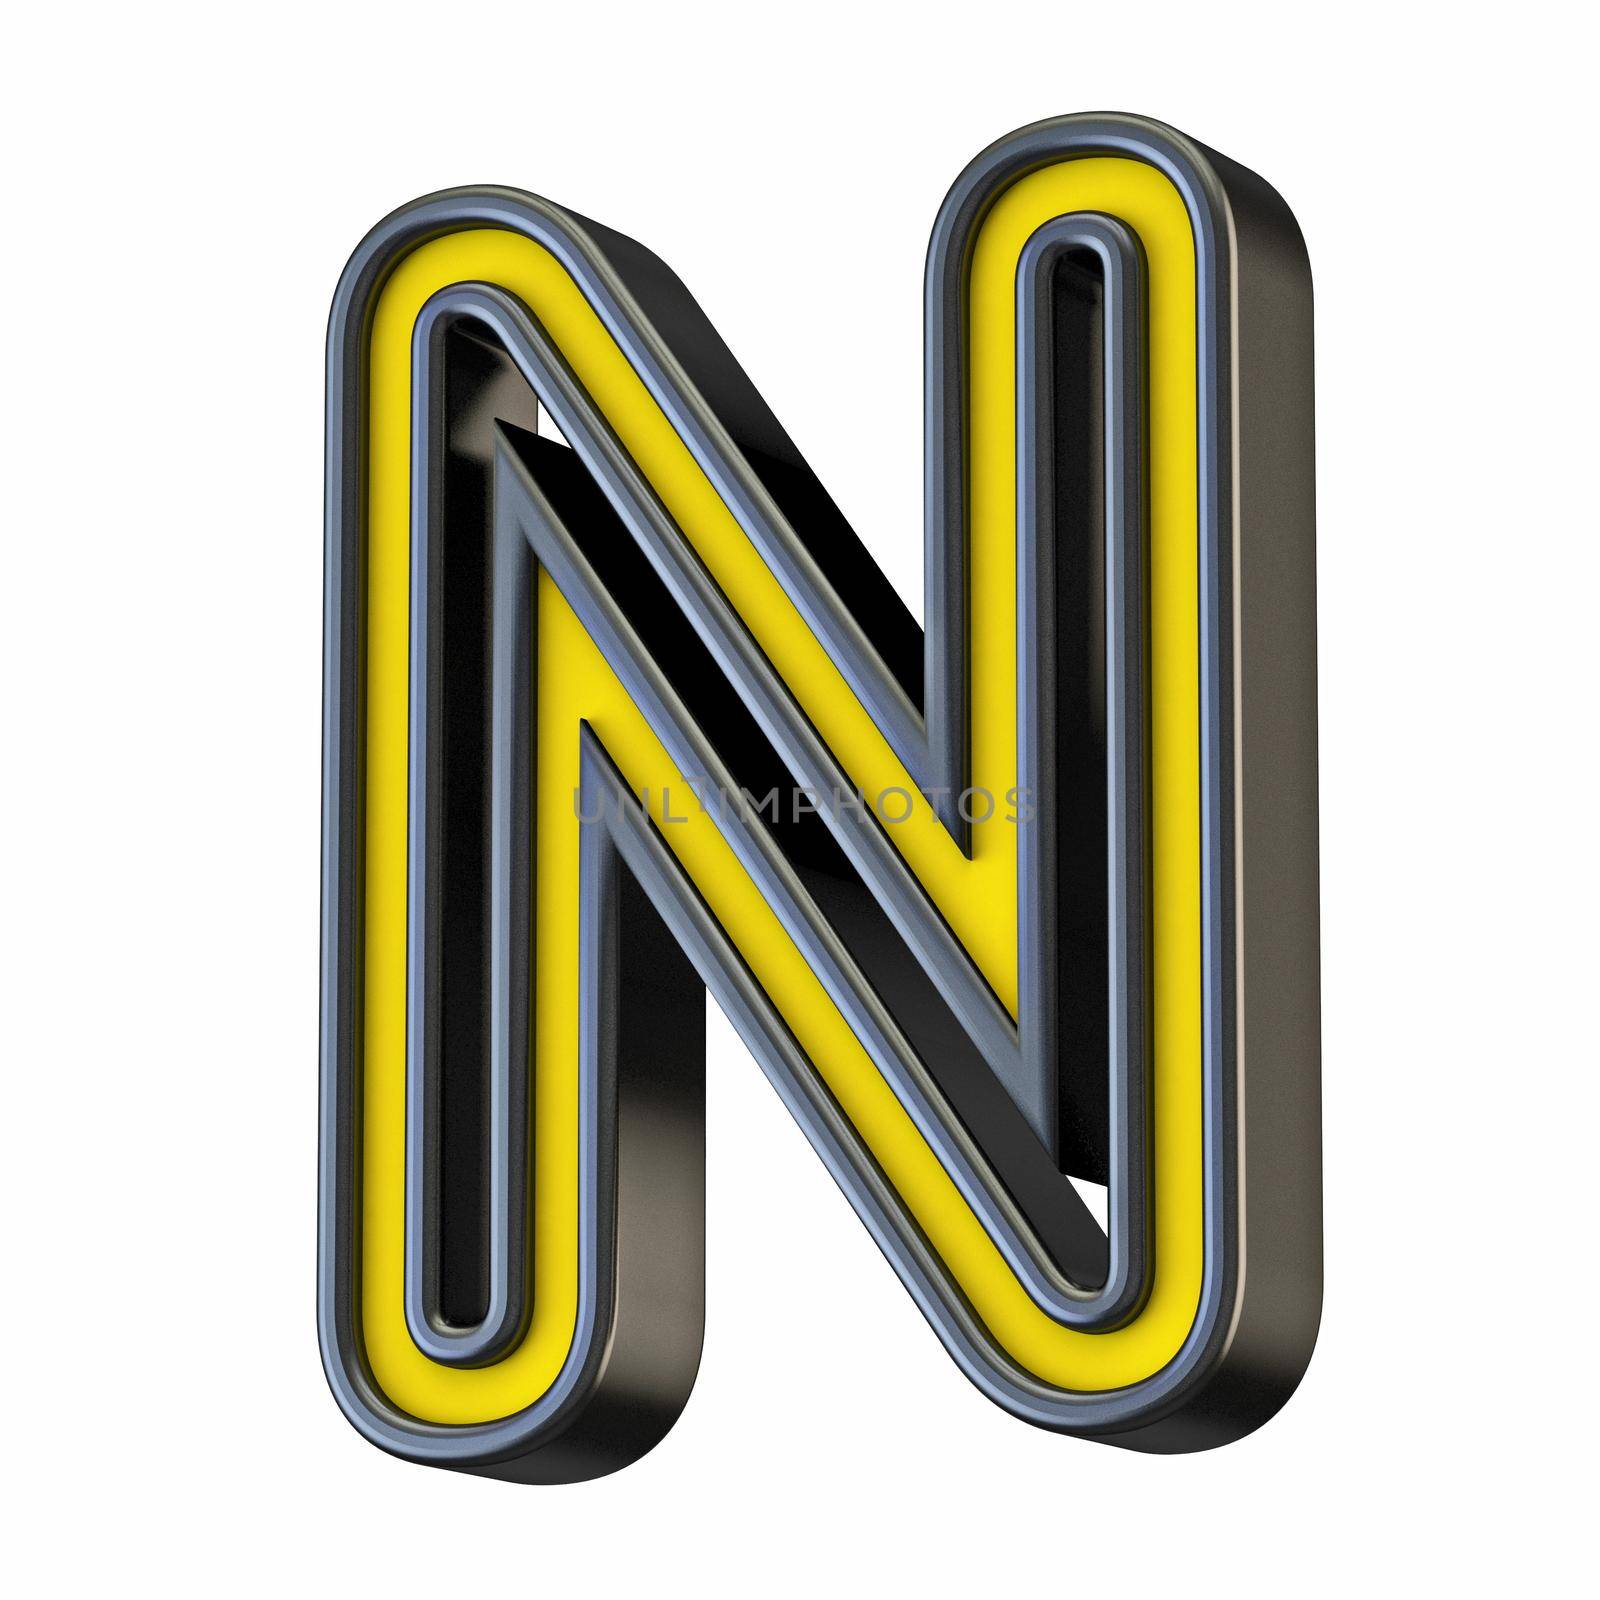 Yellow black outlined font Letter N 3D rendering illustration isolated on white background